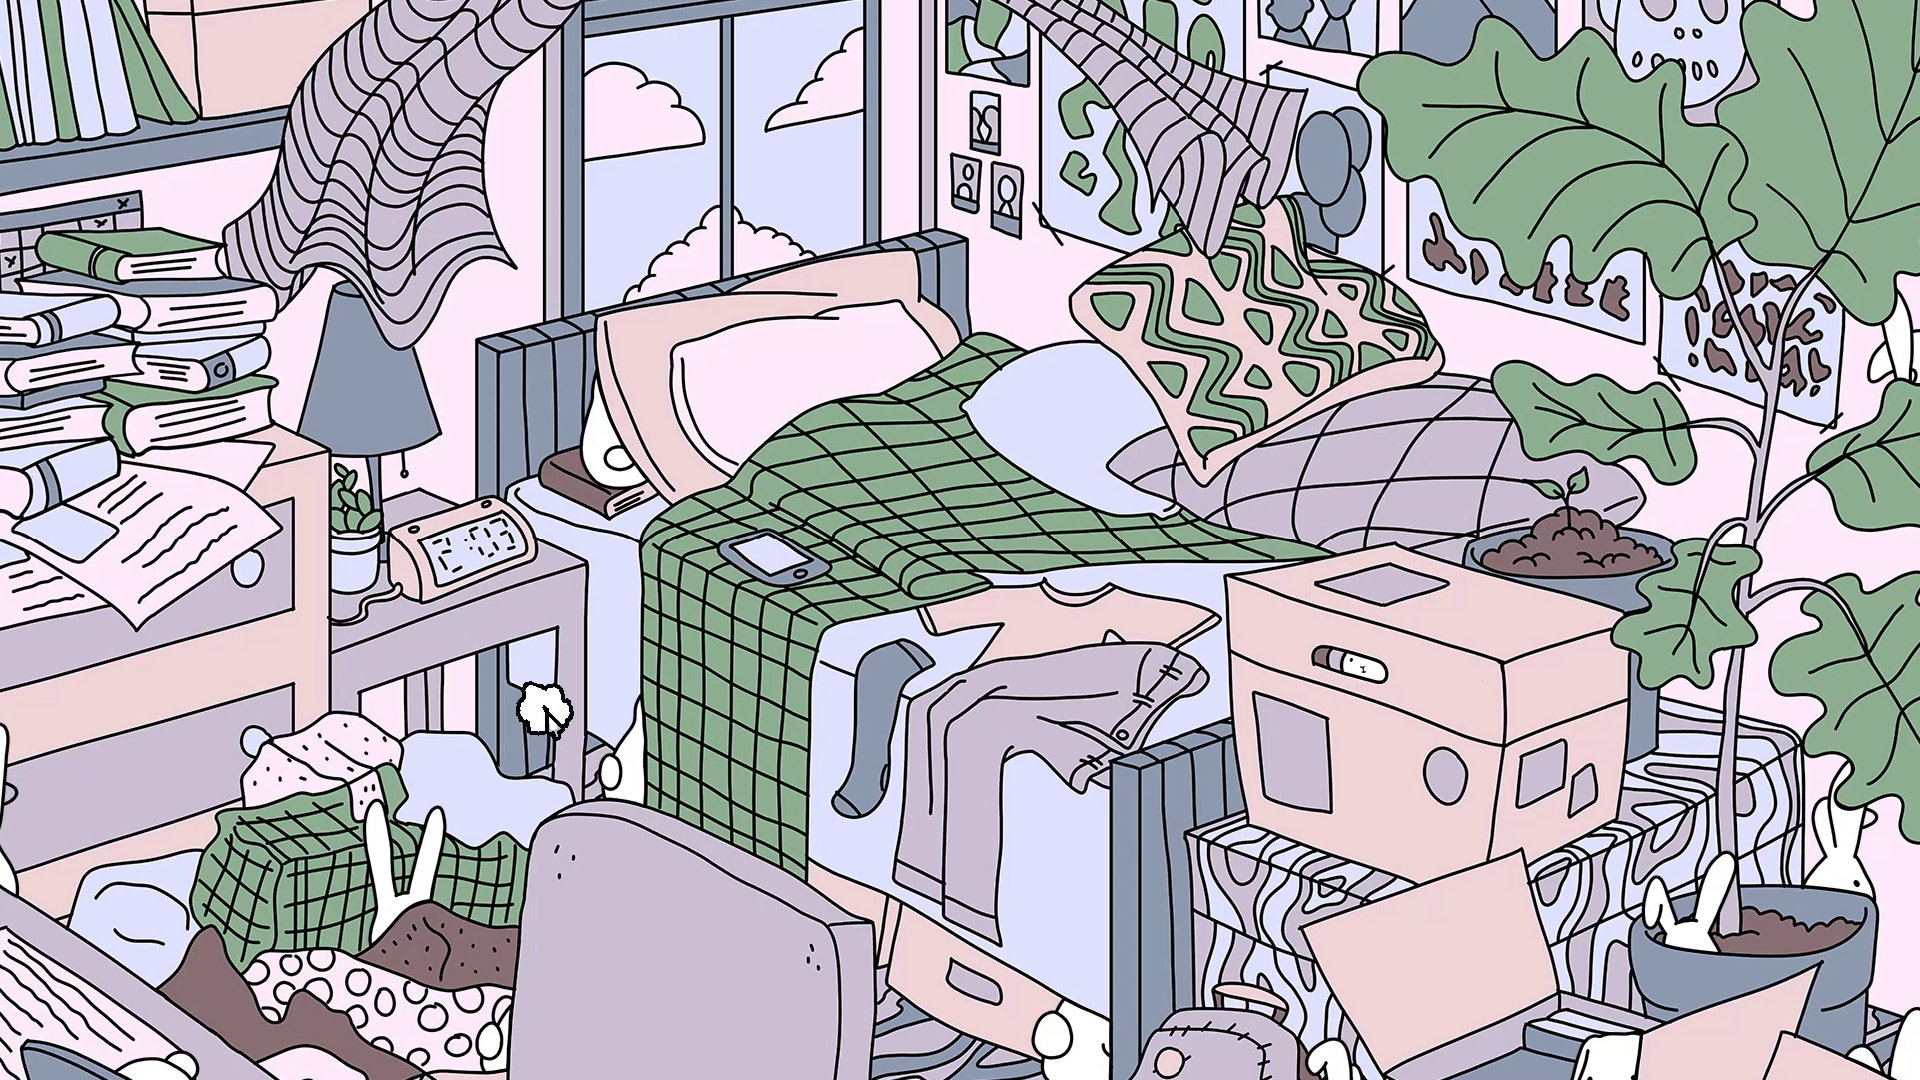 The first level in I commissioned some bunnies, where rabbits are hidden in a drawing of a messy bedroom.